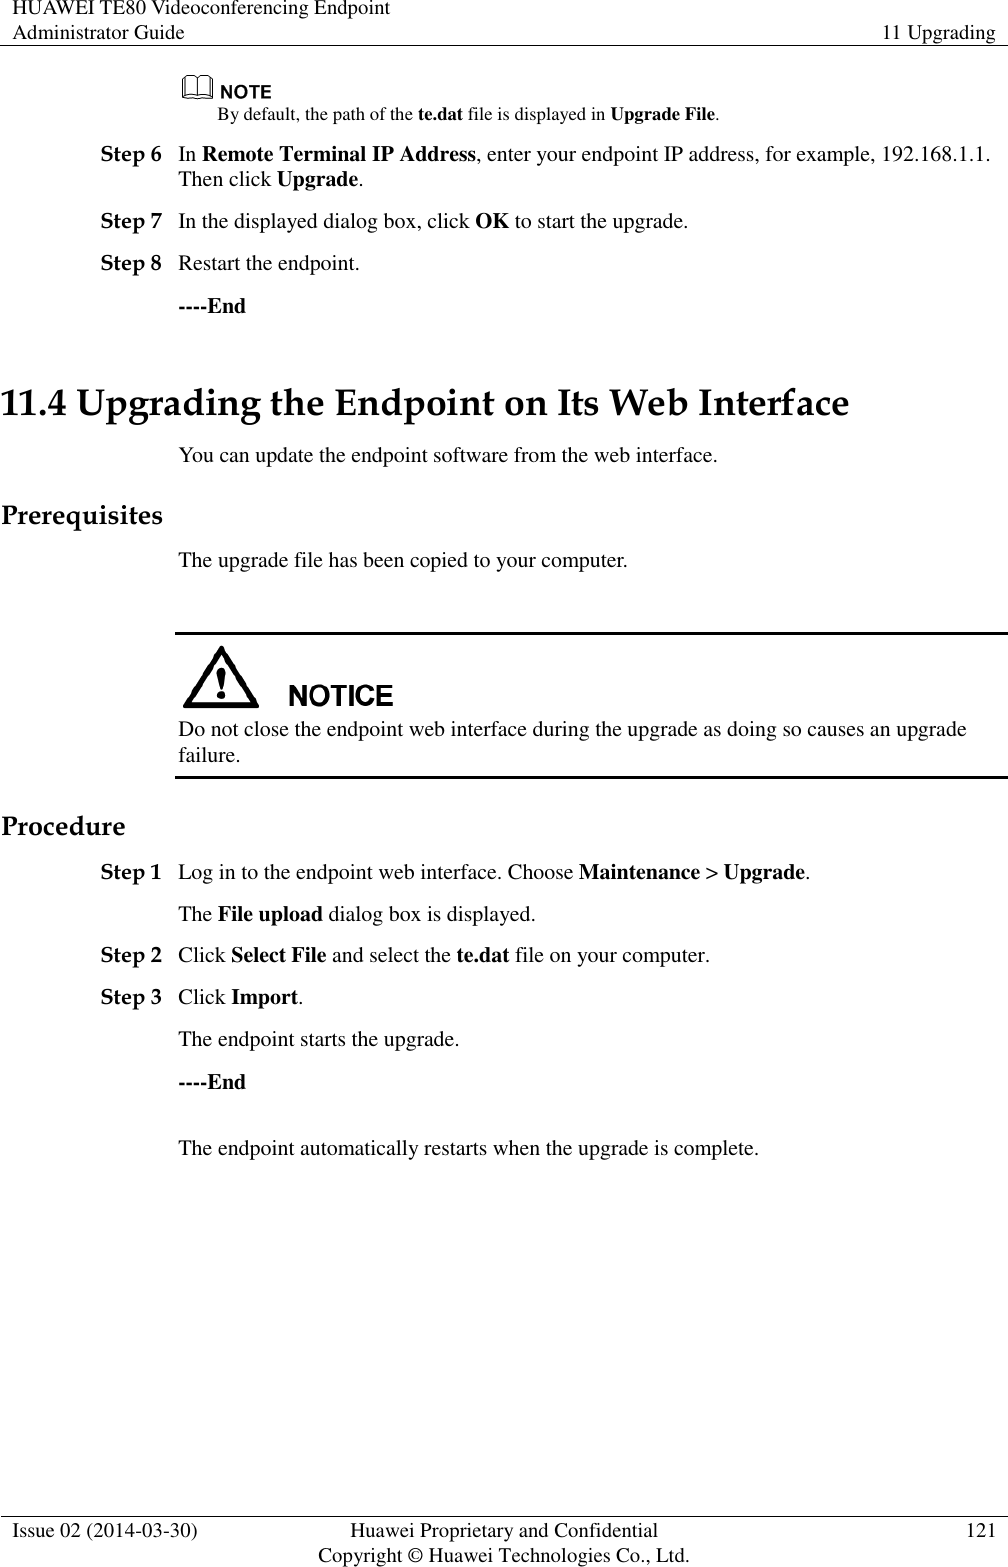 HUAWEI TE80 Videoconferencing Endpoint Administrator Guide 11 Upgrading  Issue 02 (2014-03-30) Huawei Proprietary and Confidential Copyright © Huawei Technologies Co., Ltd. 121   By default, the path of the te.dat file is displayed in Upgrade File. Step 6 In Remote Terminal IP Address, enter your endpoint IP address, for example, 192.168.1.1. Then click Upgrade. Step 7 In the displayed dialog box, click OK to start the upgrade. Step 8 Restart the endpoint. ----End 11.4 Upgrading the Endpoint on Its Web Interface You can update the endpoint software from the web interface. Prerequisites The upgrade file has been copied to your computer.   Do not close the endpoint web interface during the upgrade as doing so causes an upgrade failure. Procedure Step 1 Log in to the endpoint web interface. Choose Maintenance &gt; Upgrade. The File upload dialog box is displayed. Step 2 Click Select File and select the te.dat file on your computer. Step 3 Click Import. The endpoint starts the upgrade. ----End The endpoint automatically restarts when the upgrade is complete.   